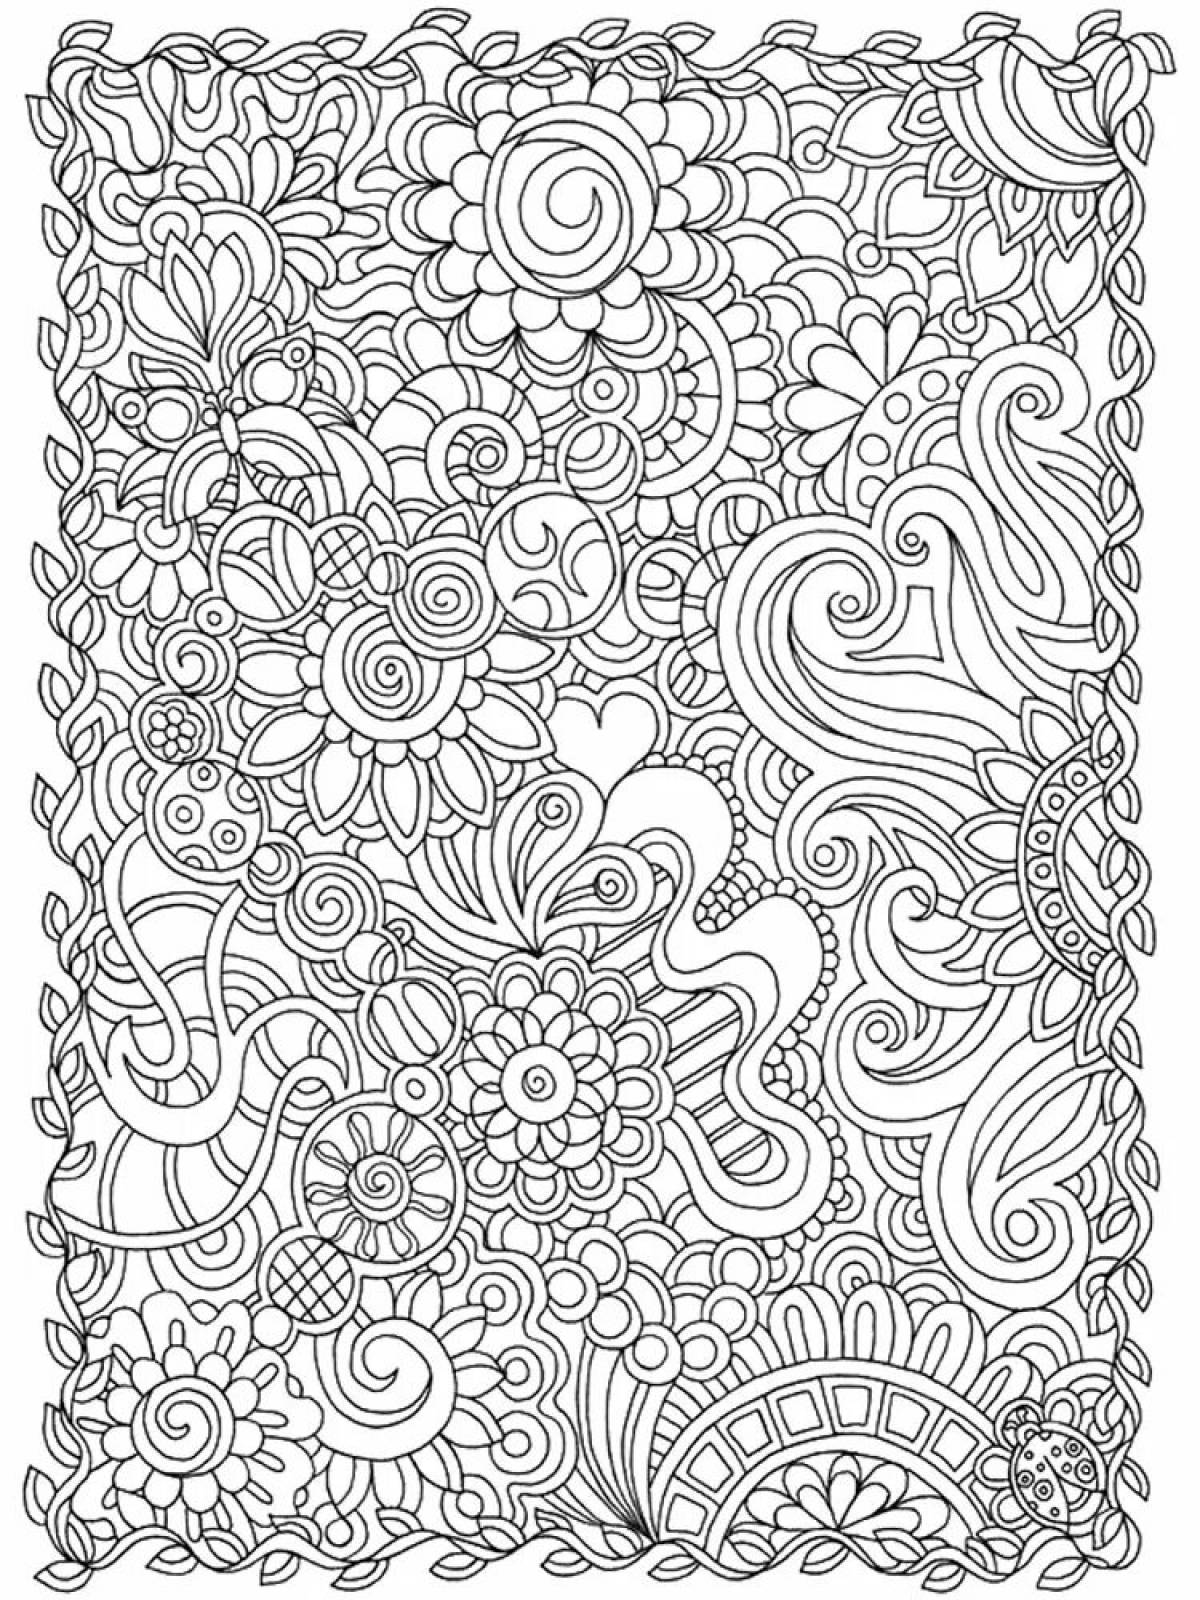 Coloring book intricate patterns - dazzling